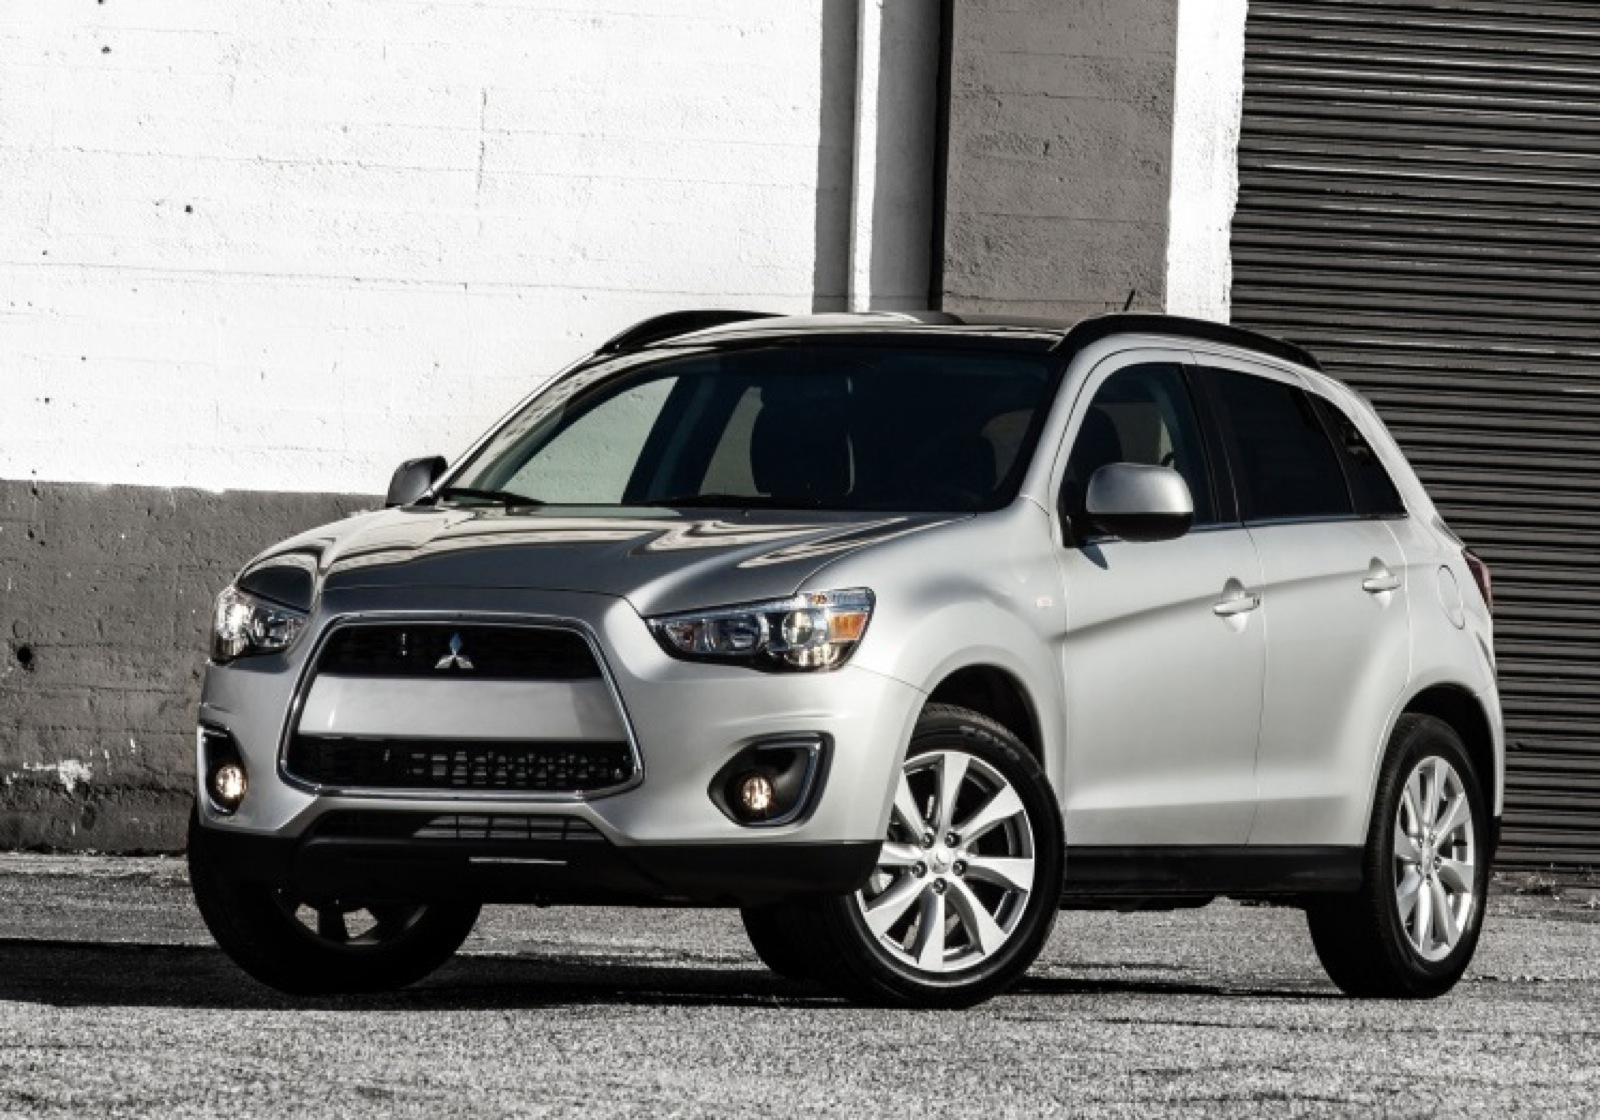 2014 Mitsubishi Outlander Sport Review, Ratings, Specs, Prices